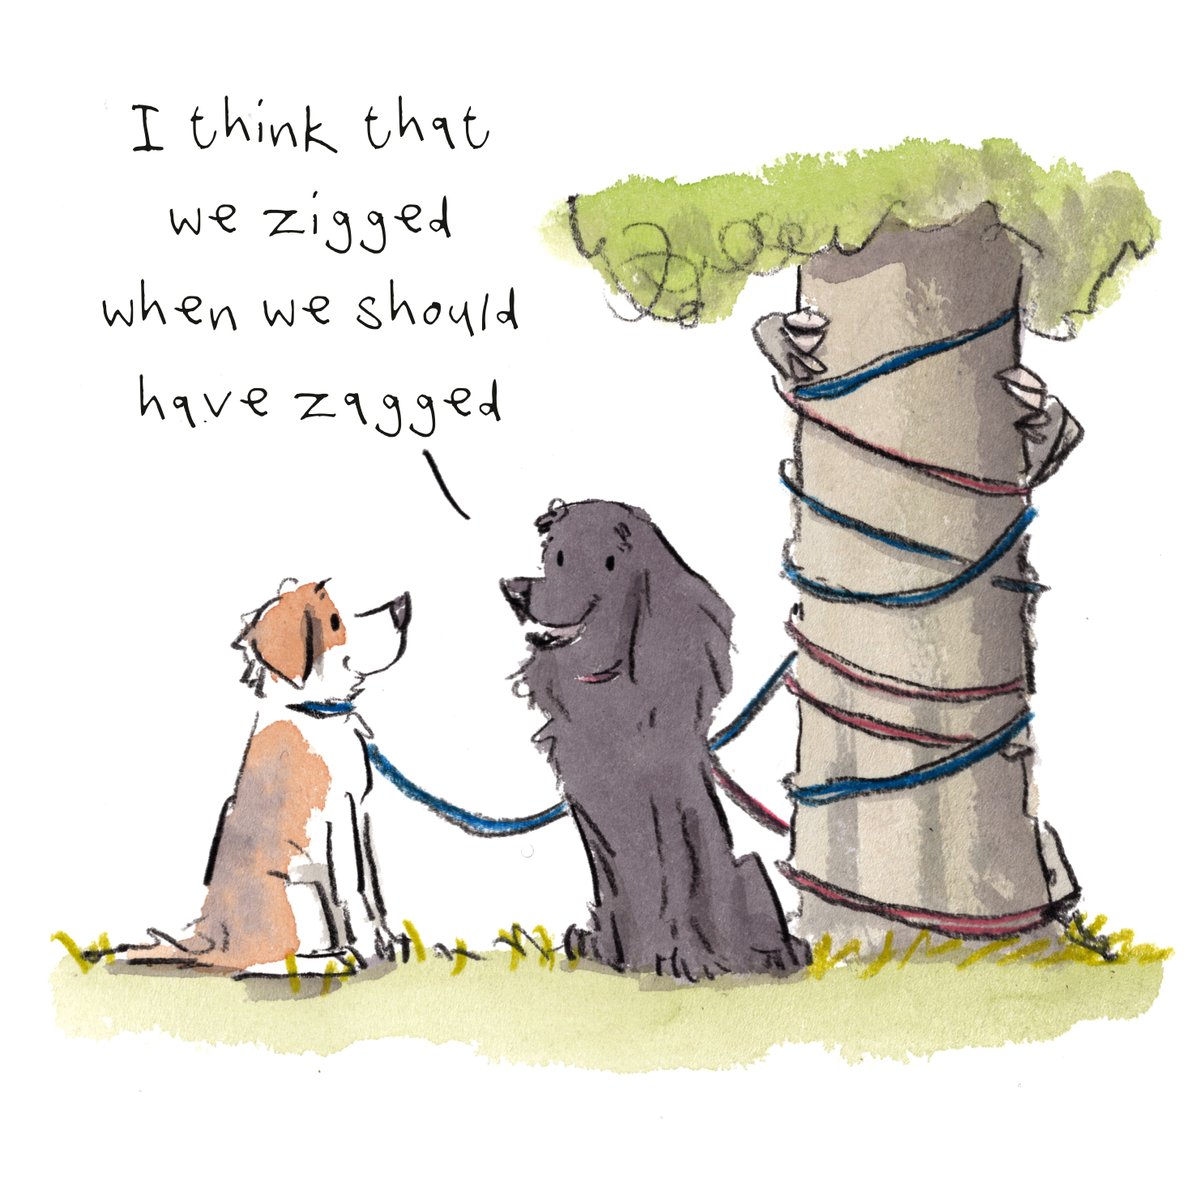 I hope that you are having a really fab day so far, lovely people and lovely dogs. 
These two zigged when they should have zagged...
I am wishing you the very best for the rest of your day. 
#hoorayfordogs #dogwalking